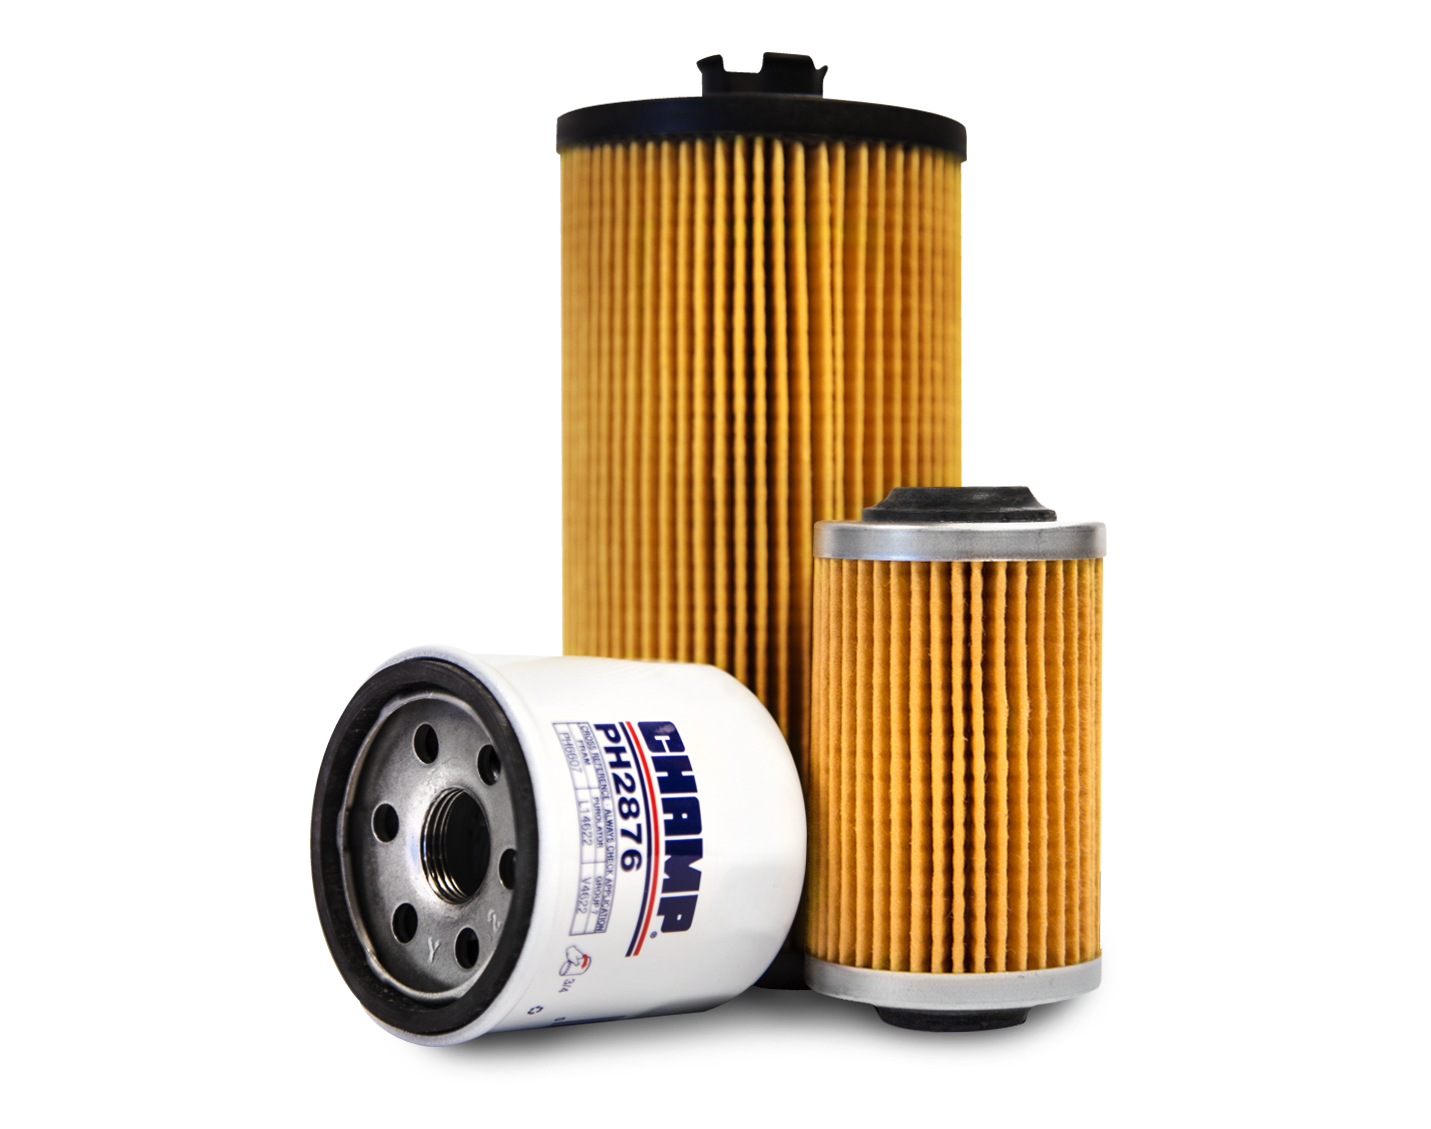 Champ Labs PH2901 Champ 4 Spin-on Oil Filter for 